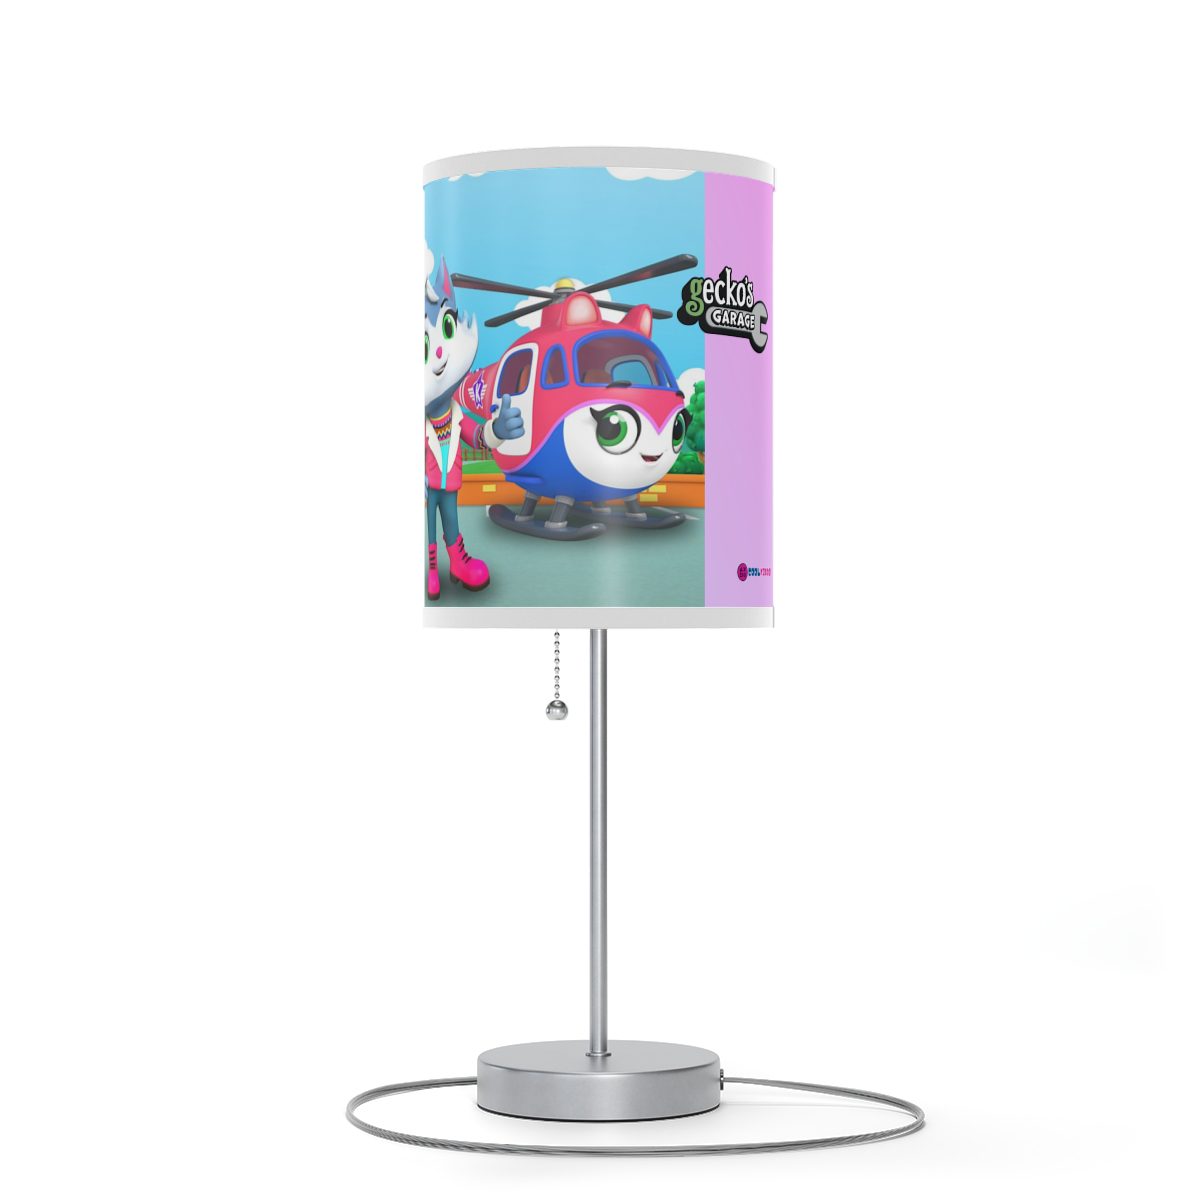 Gecko’s Garage Main Characters Lamp on a Stand Cool Kiddo 28